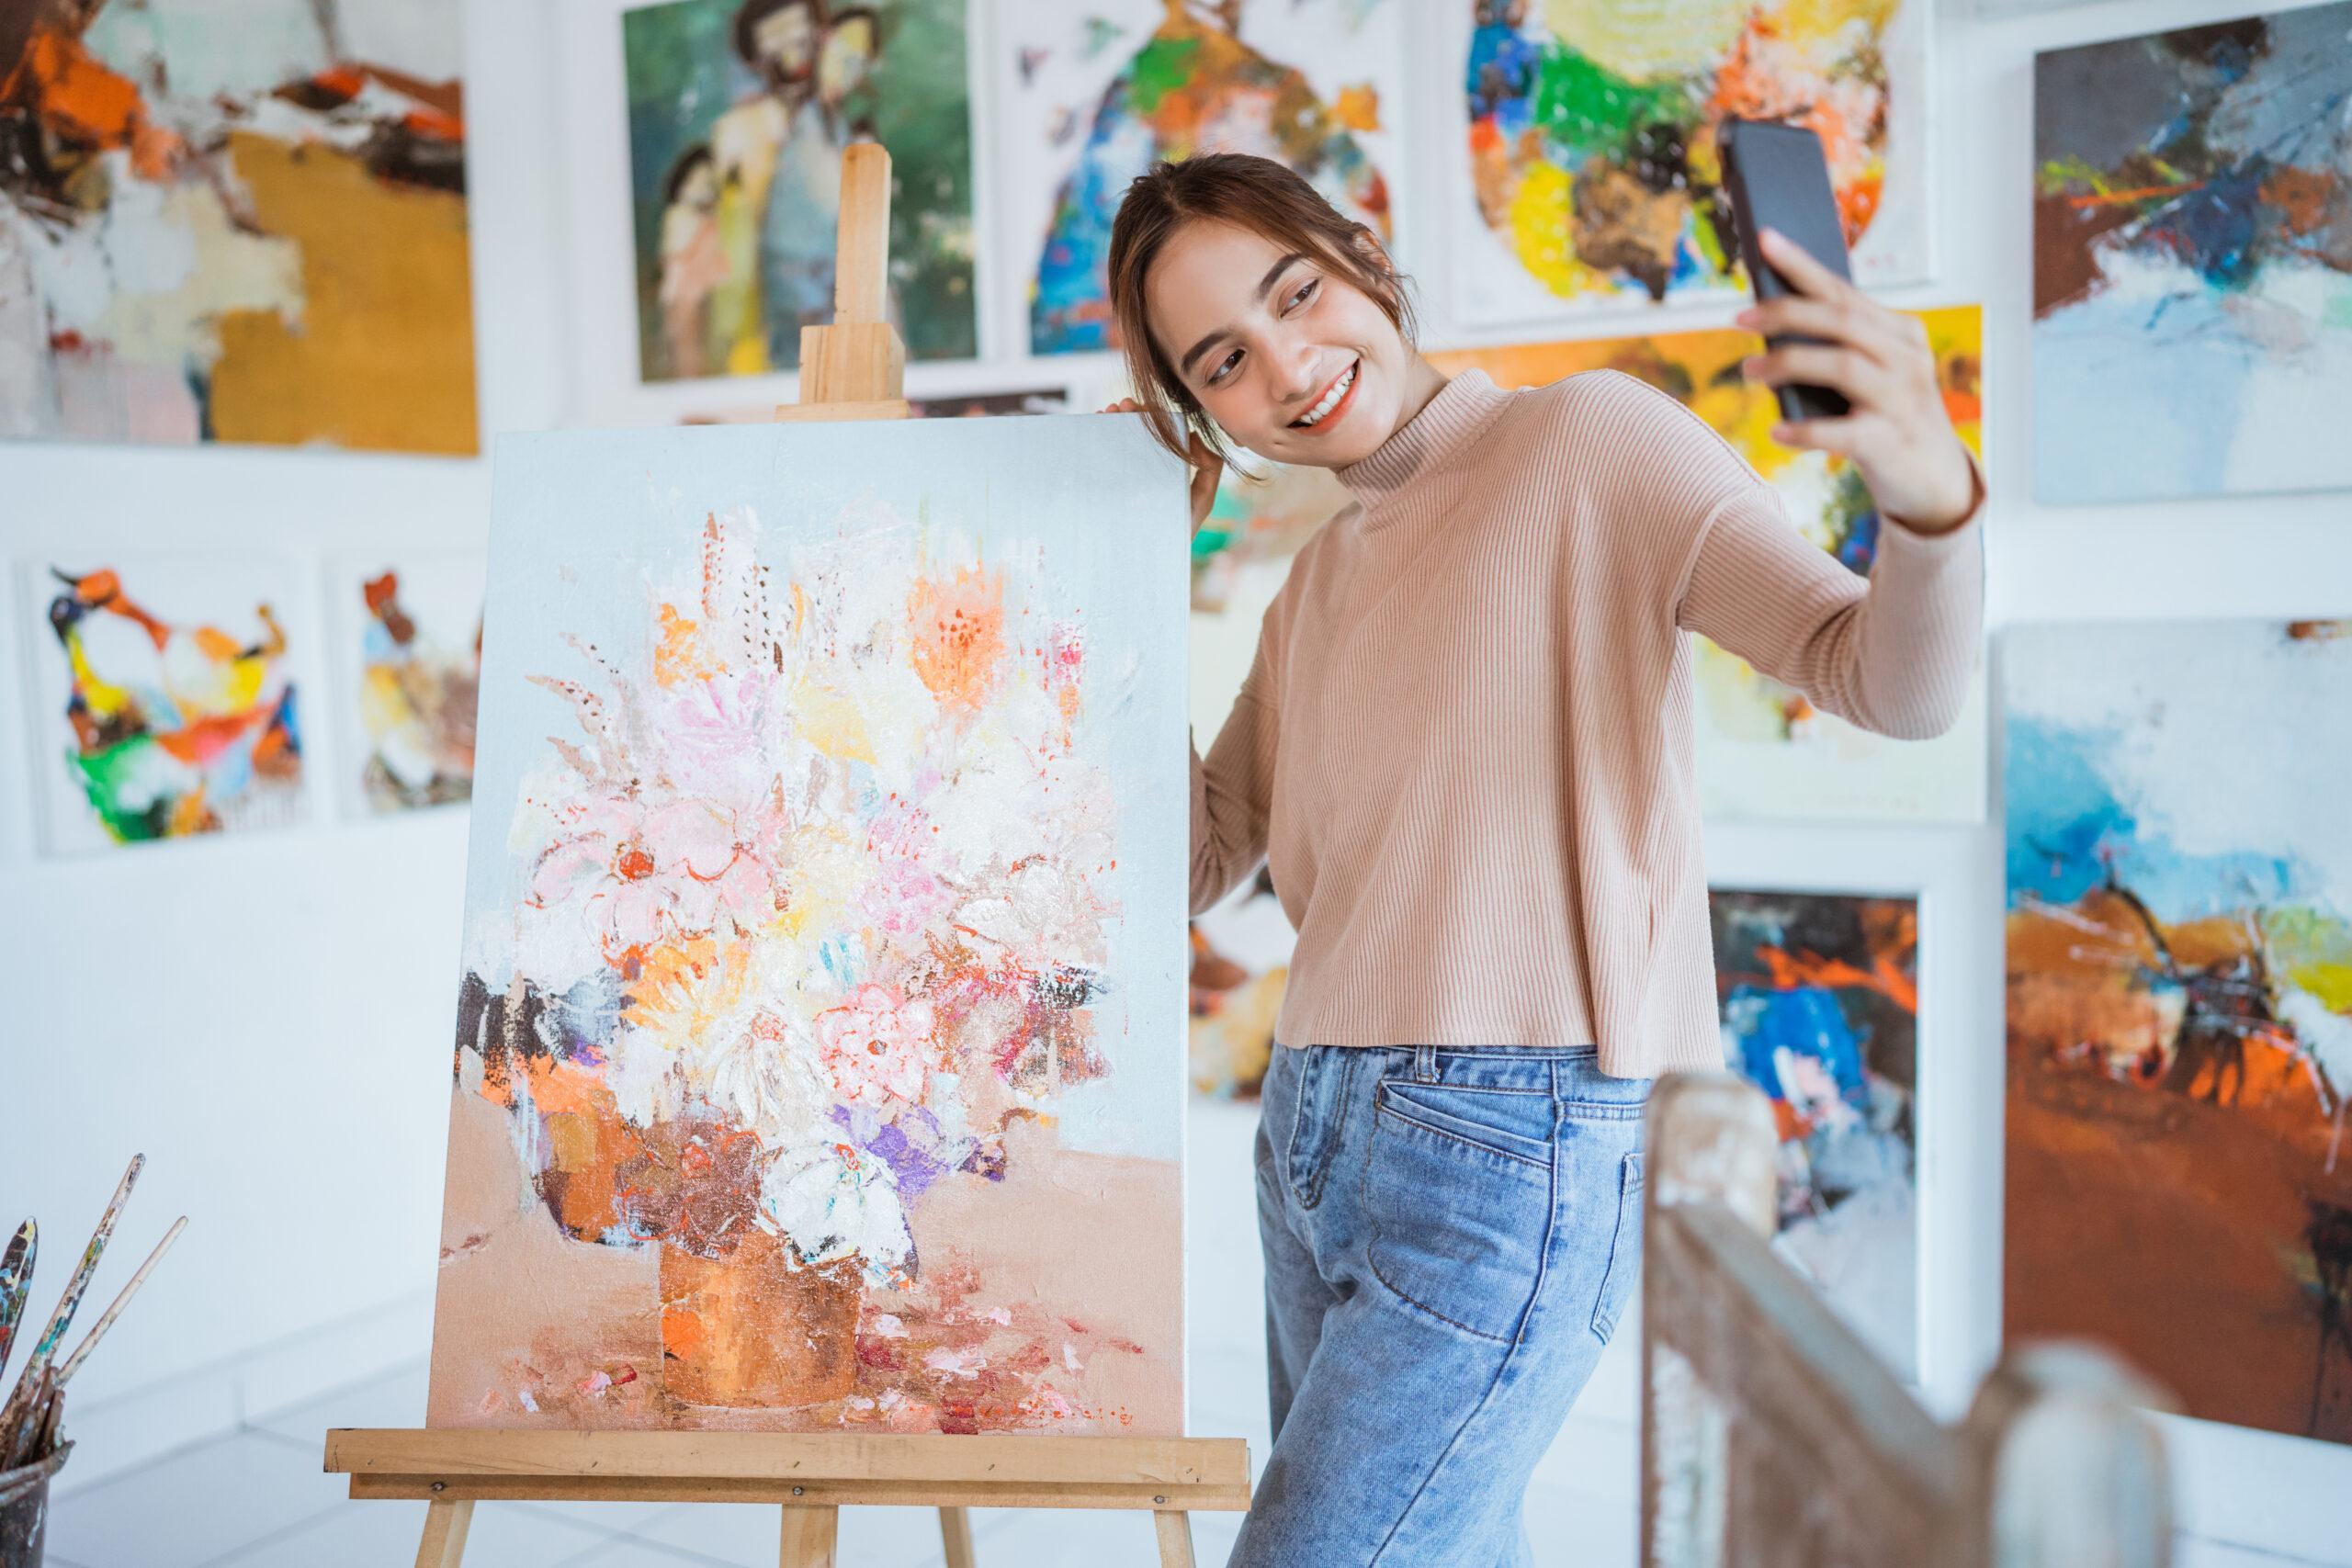 Artist taking a selfie with her painting